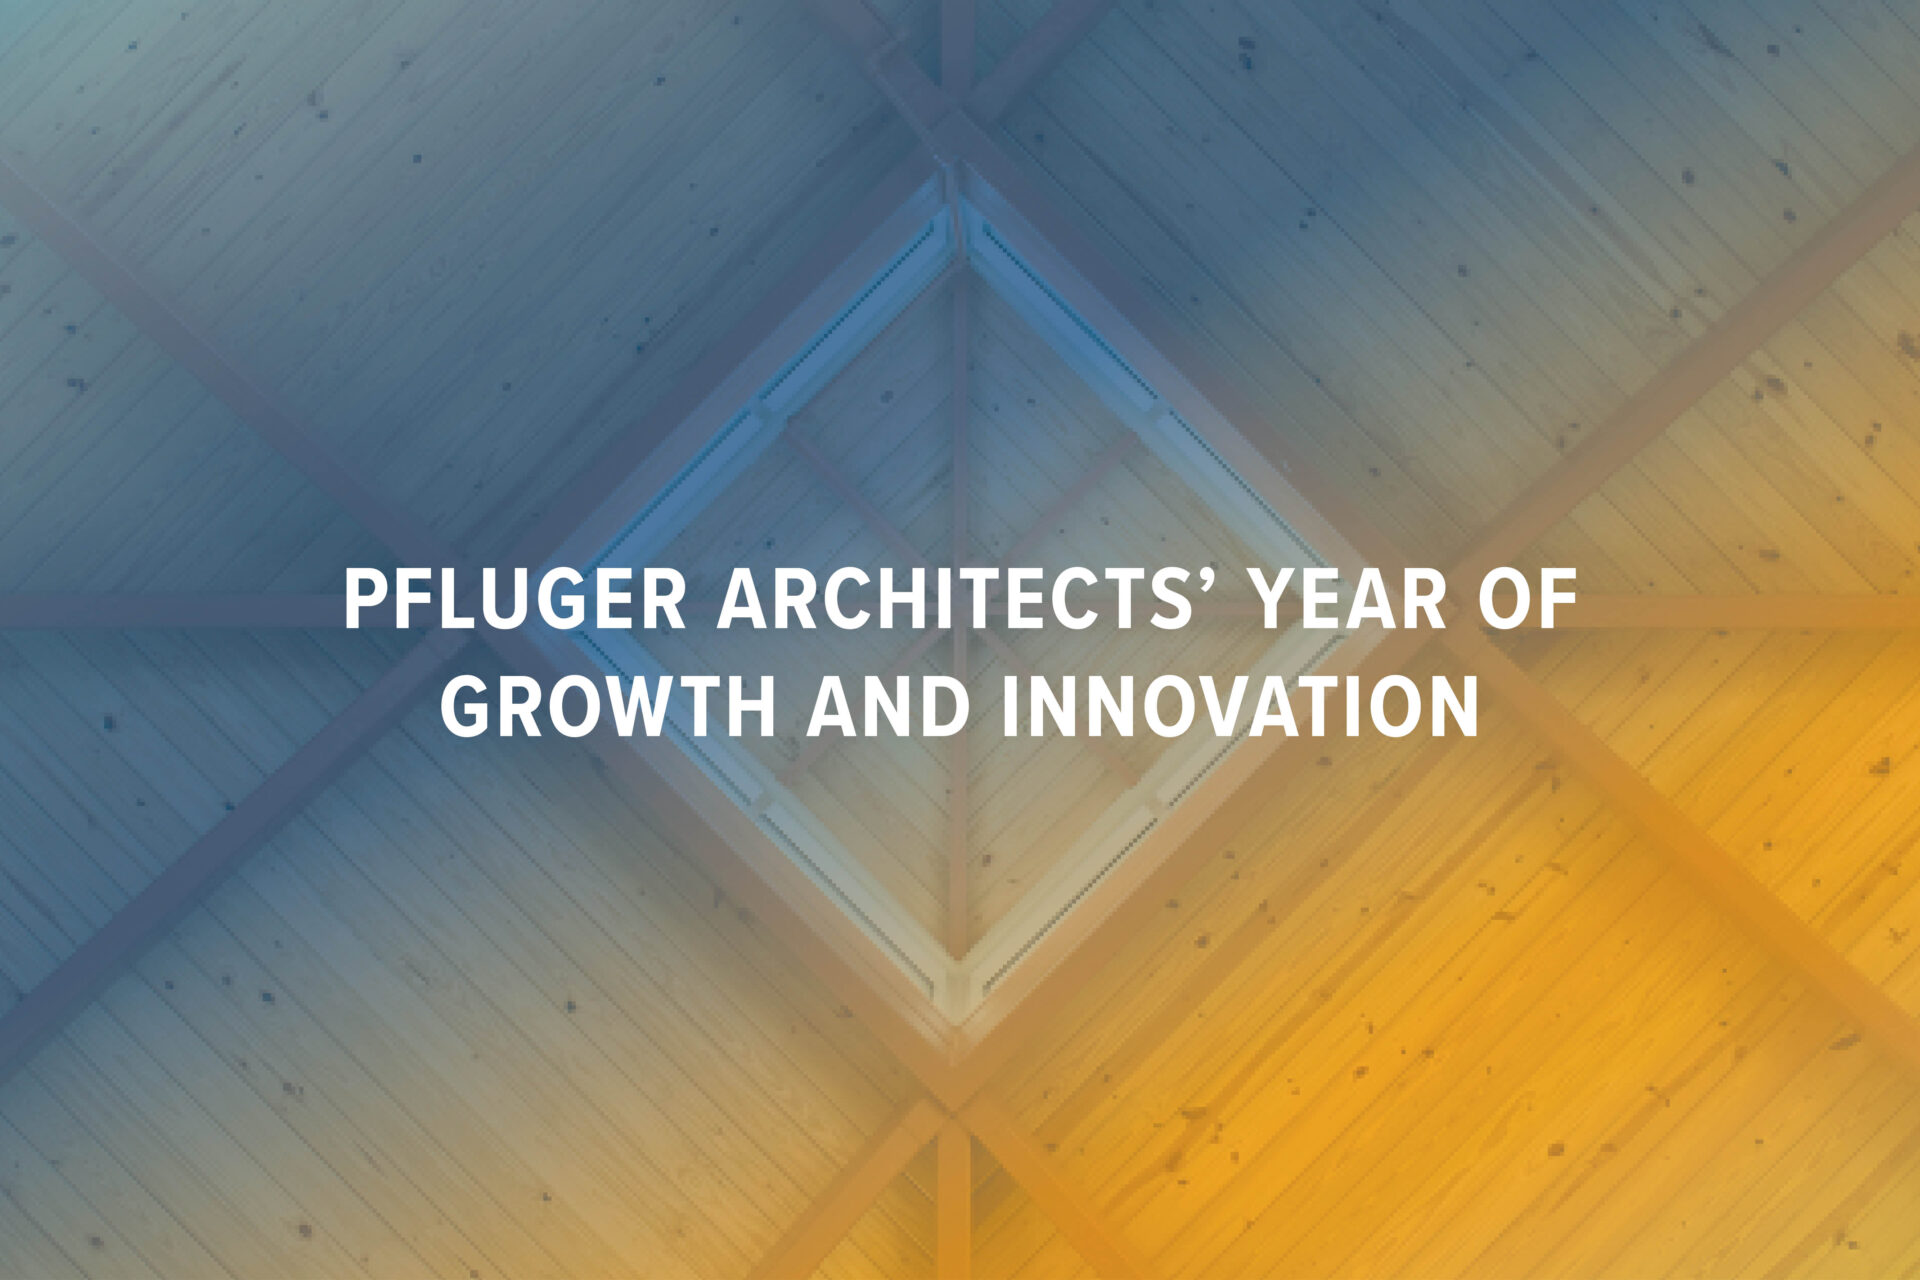 Pfluger's year of growth and innovation